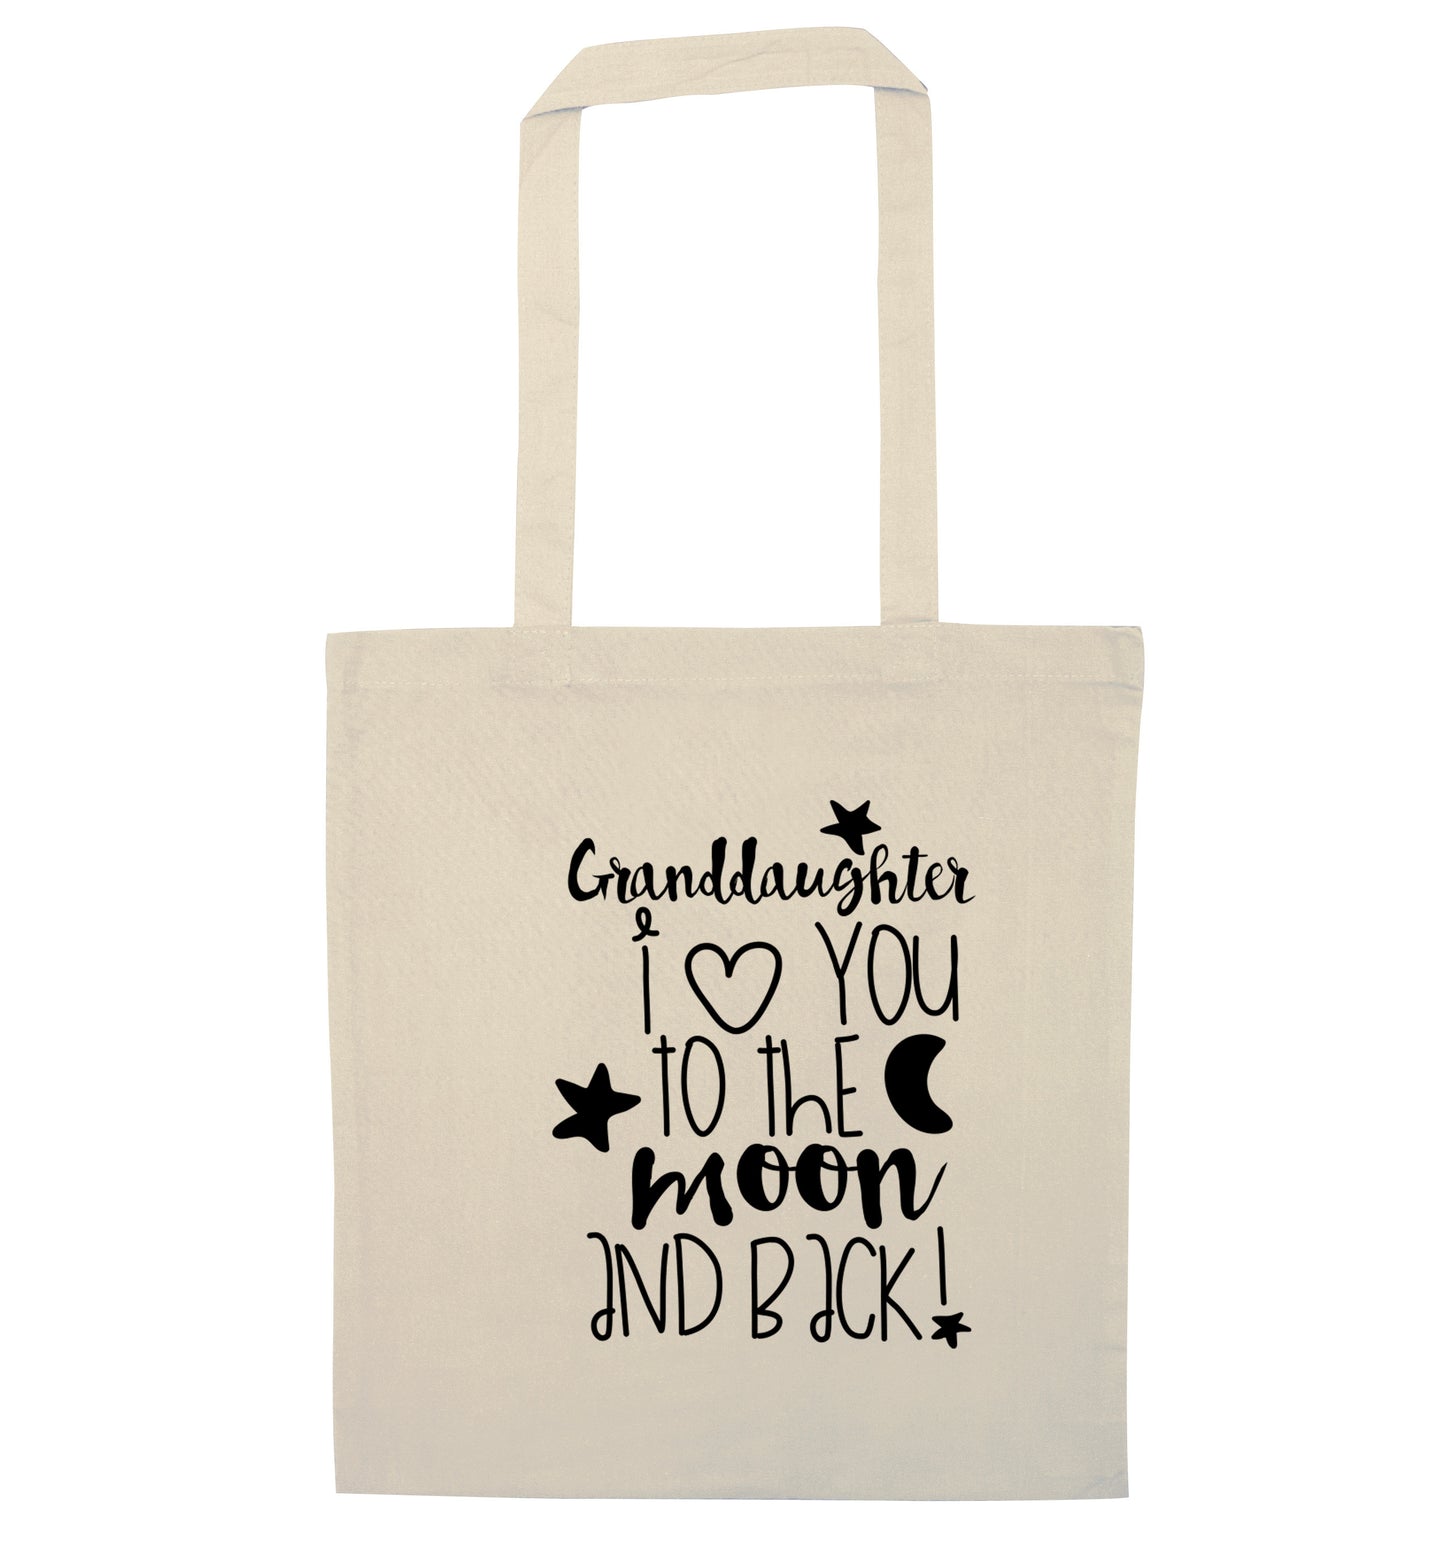 Granddaughter I love you to the moon and back natural tote bag